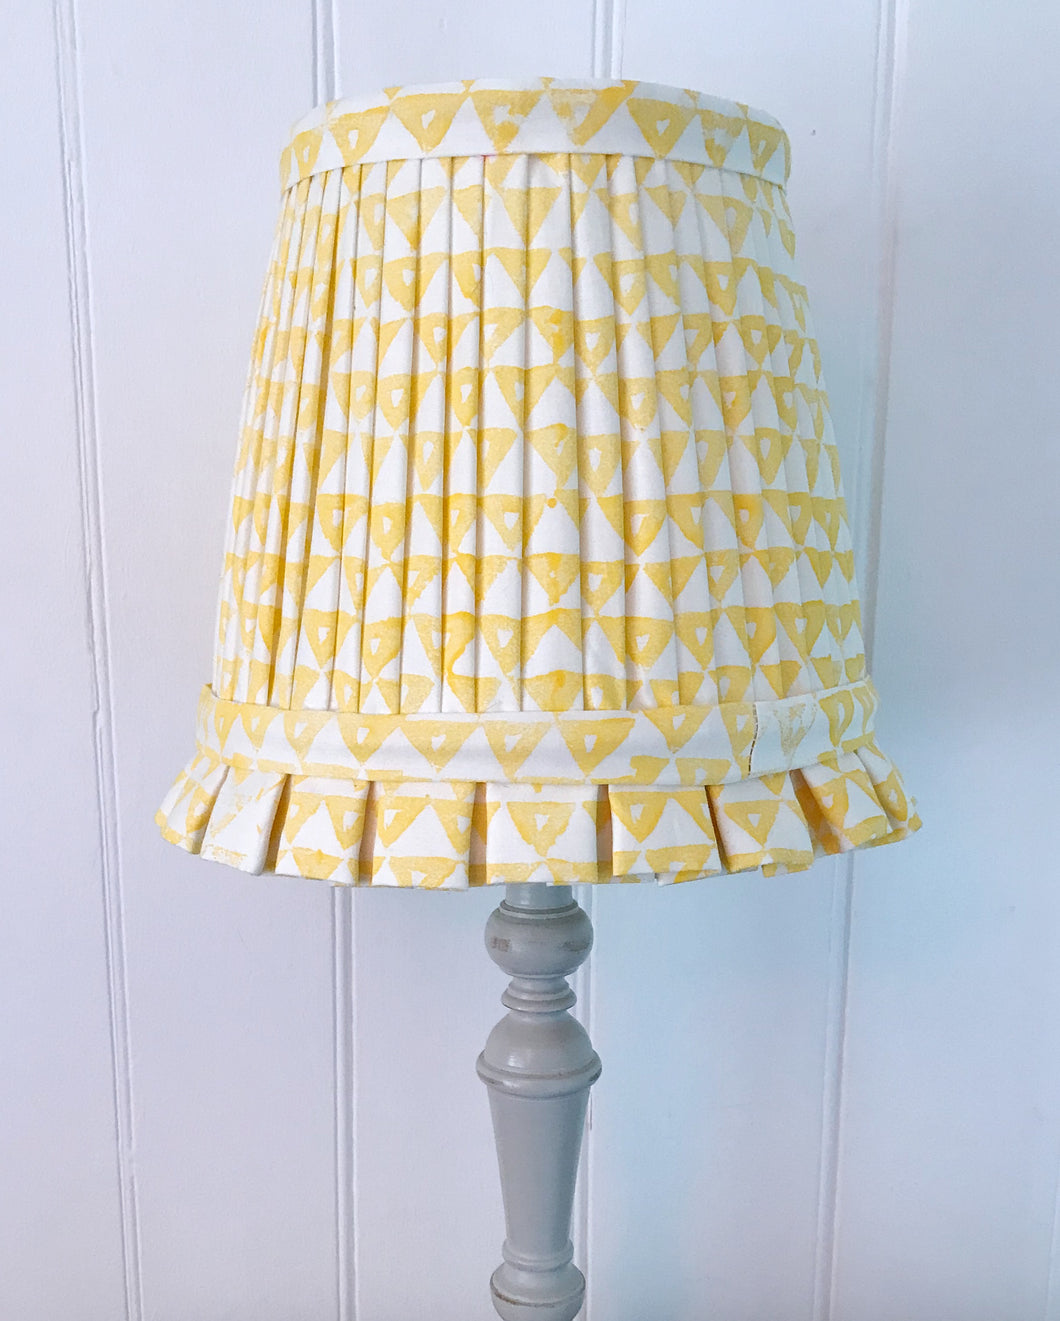 26cm Pleated Yellow Lampshade, Frilly Base - Hand Block Printed Yellow